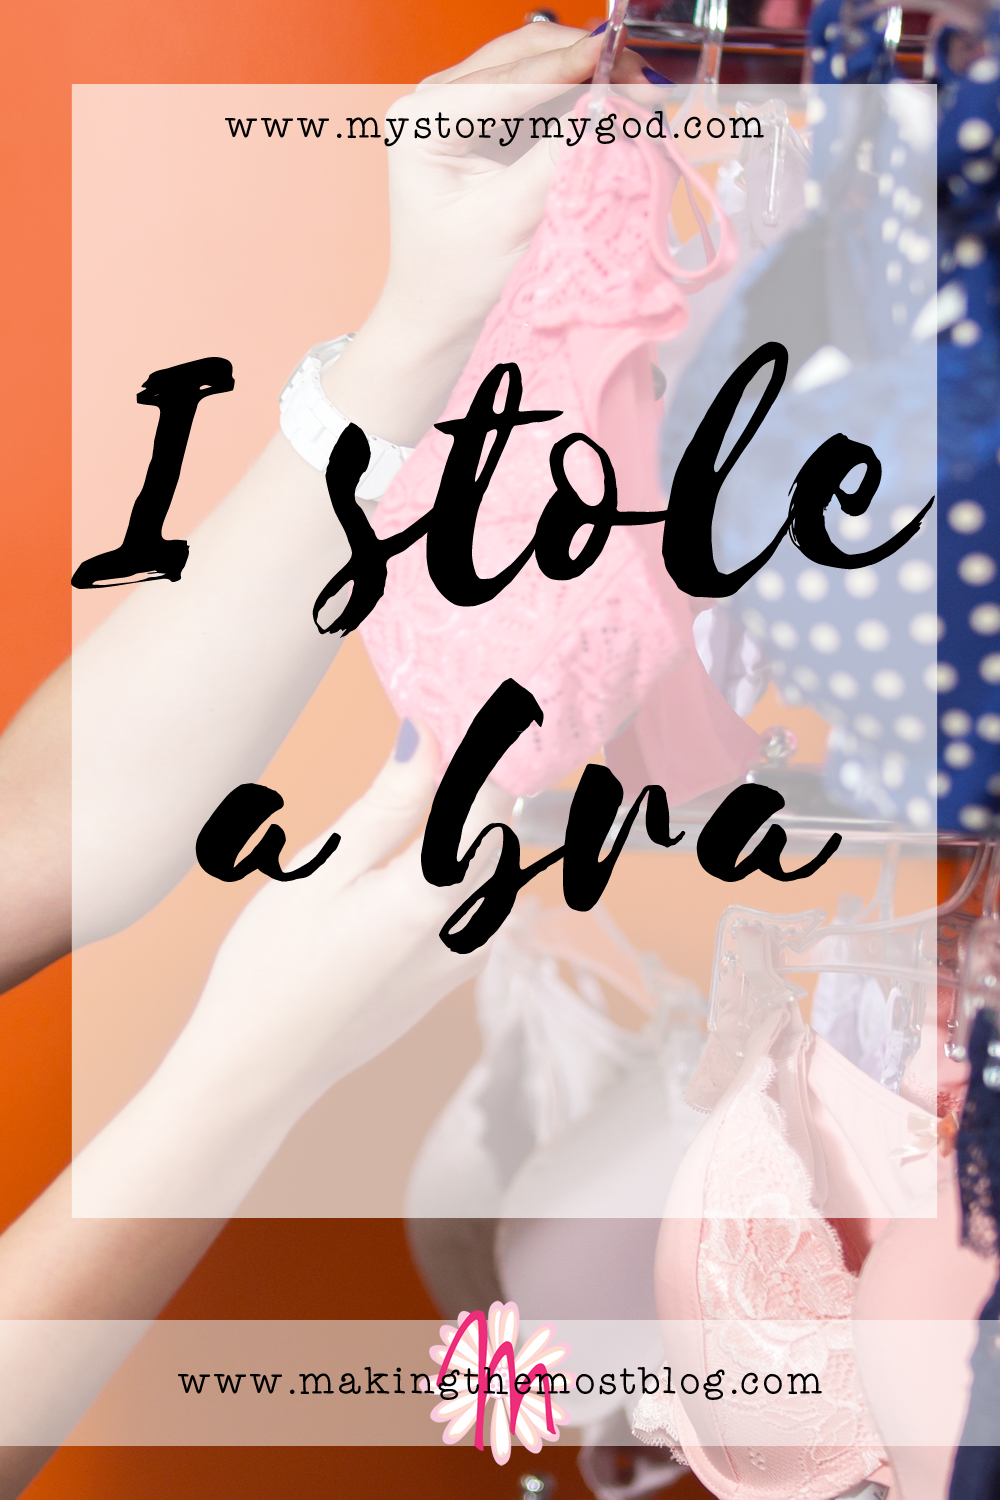 I Stole a Bra | Making the Most Blog